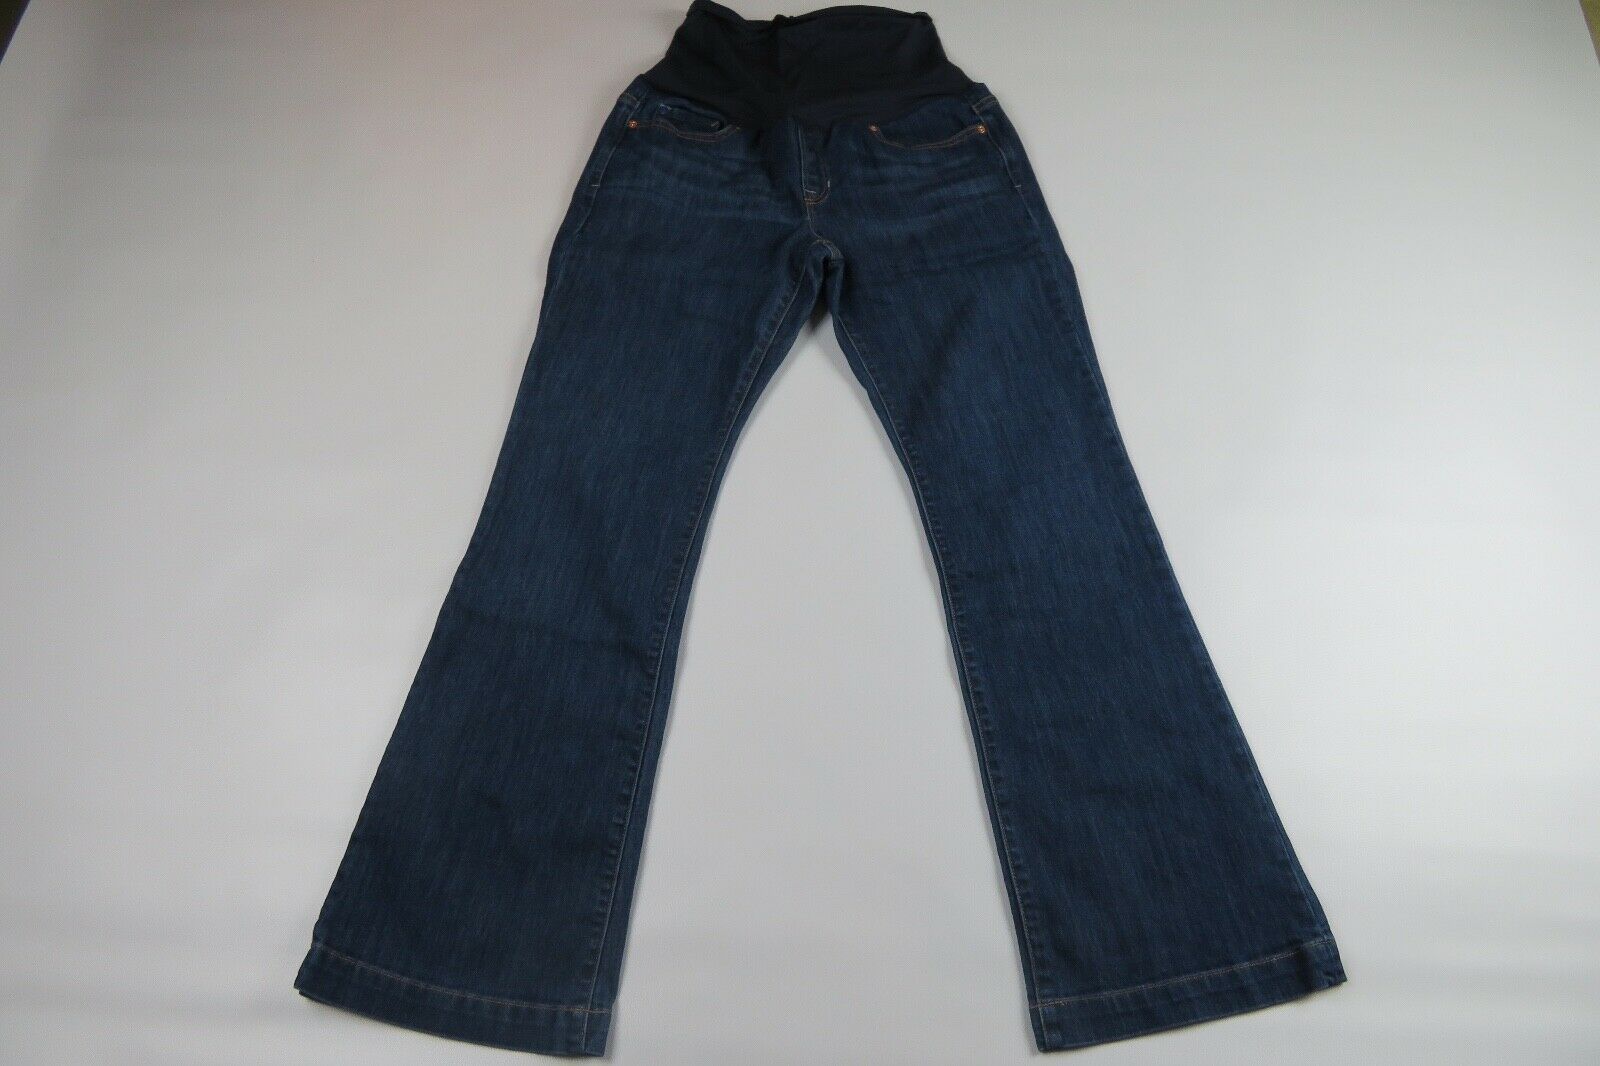 gap 1969 long and lean jeans